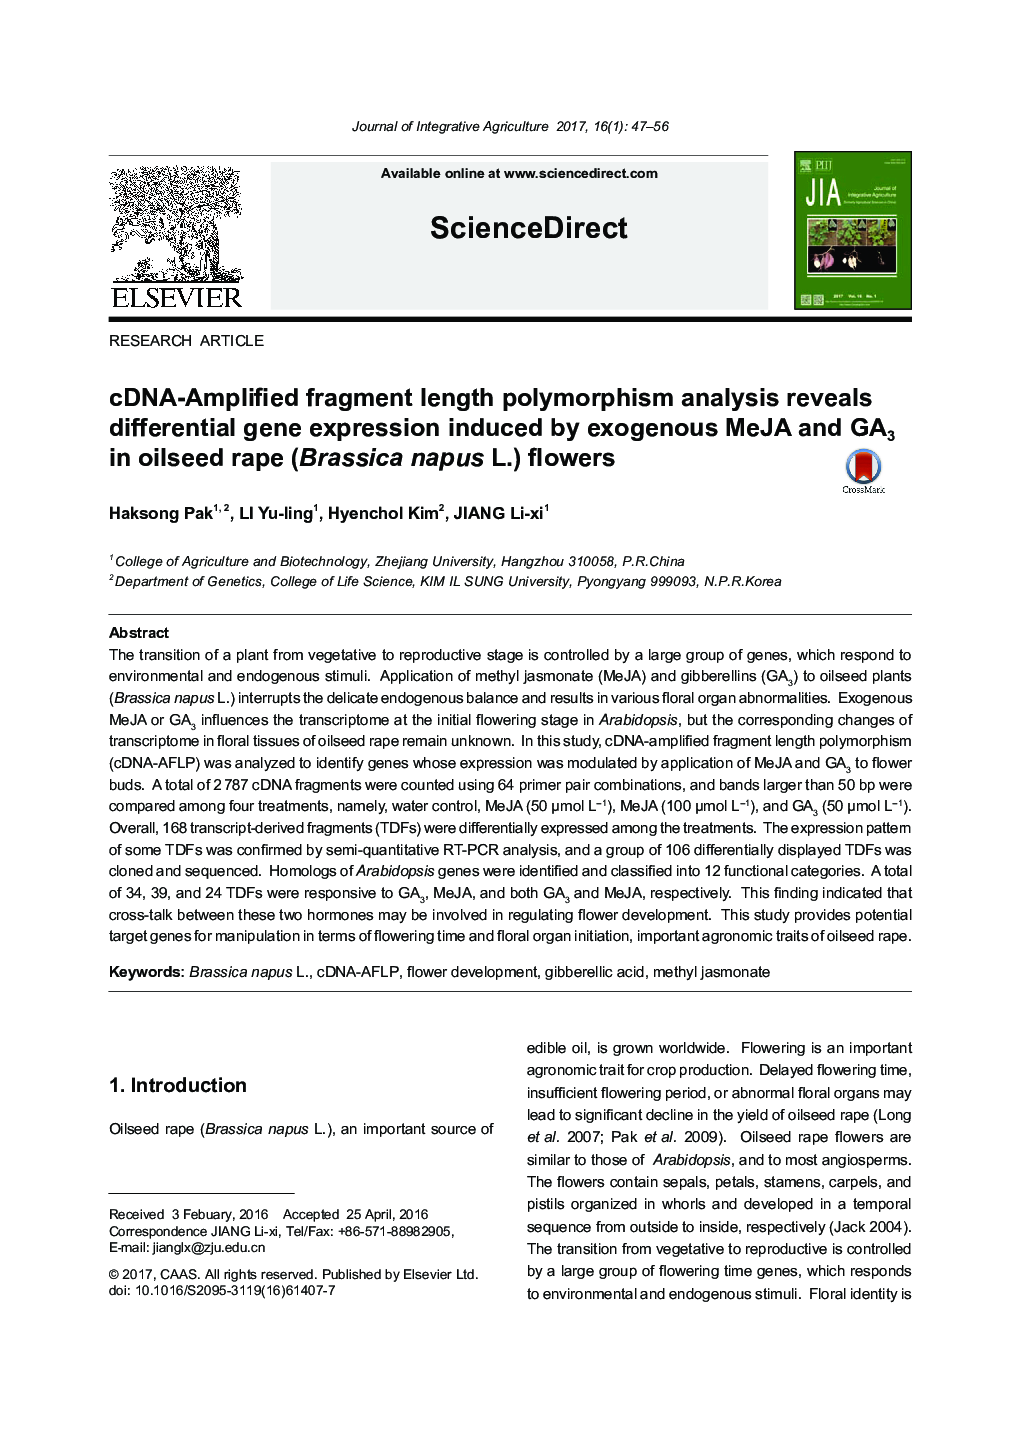 cDNA-Amplified fragment length polymorphism analysis reveals differential gene expression induced by exogenous MeJA and GA3 in oilseed rape (Brassica napus L.) flowers